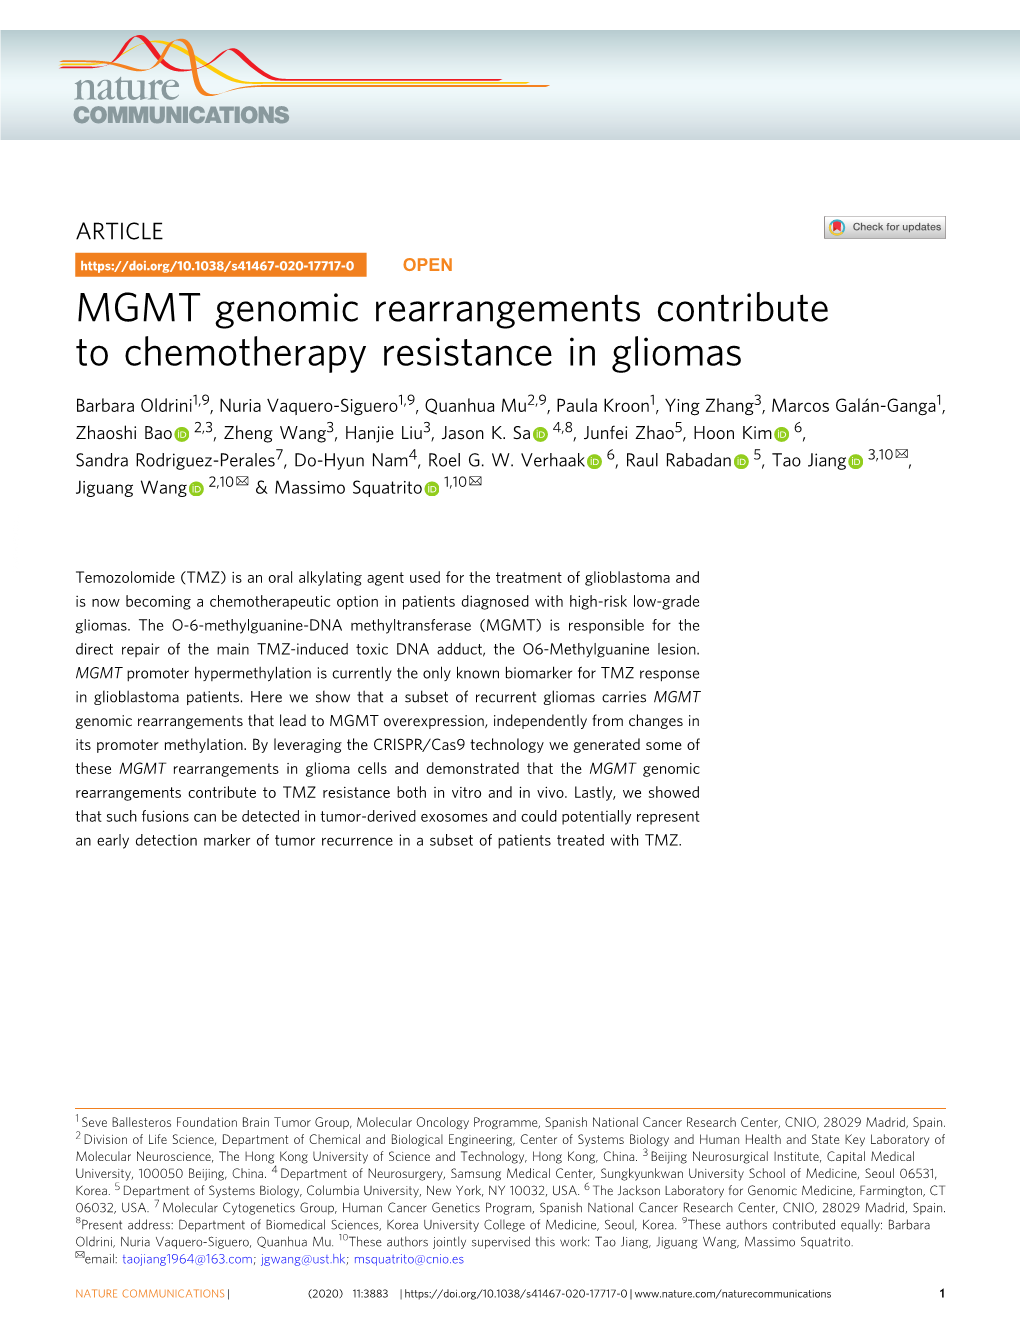 MGMT Genomic Rearrangements Contribute to Chemotherapy Resistance in Gliomas